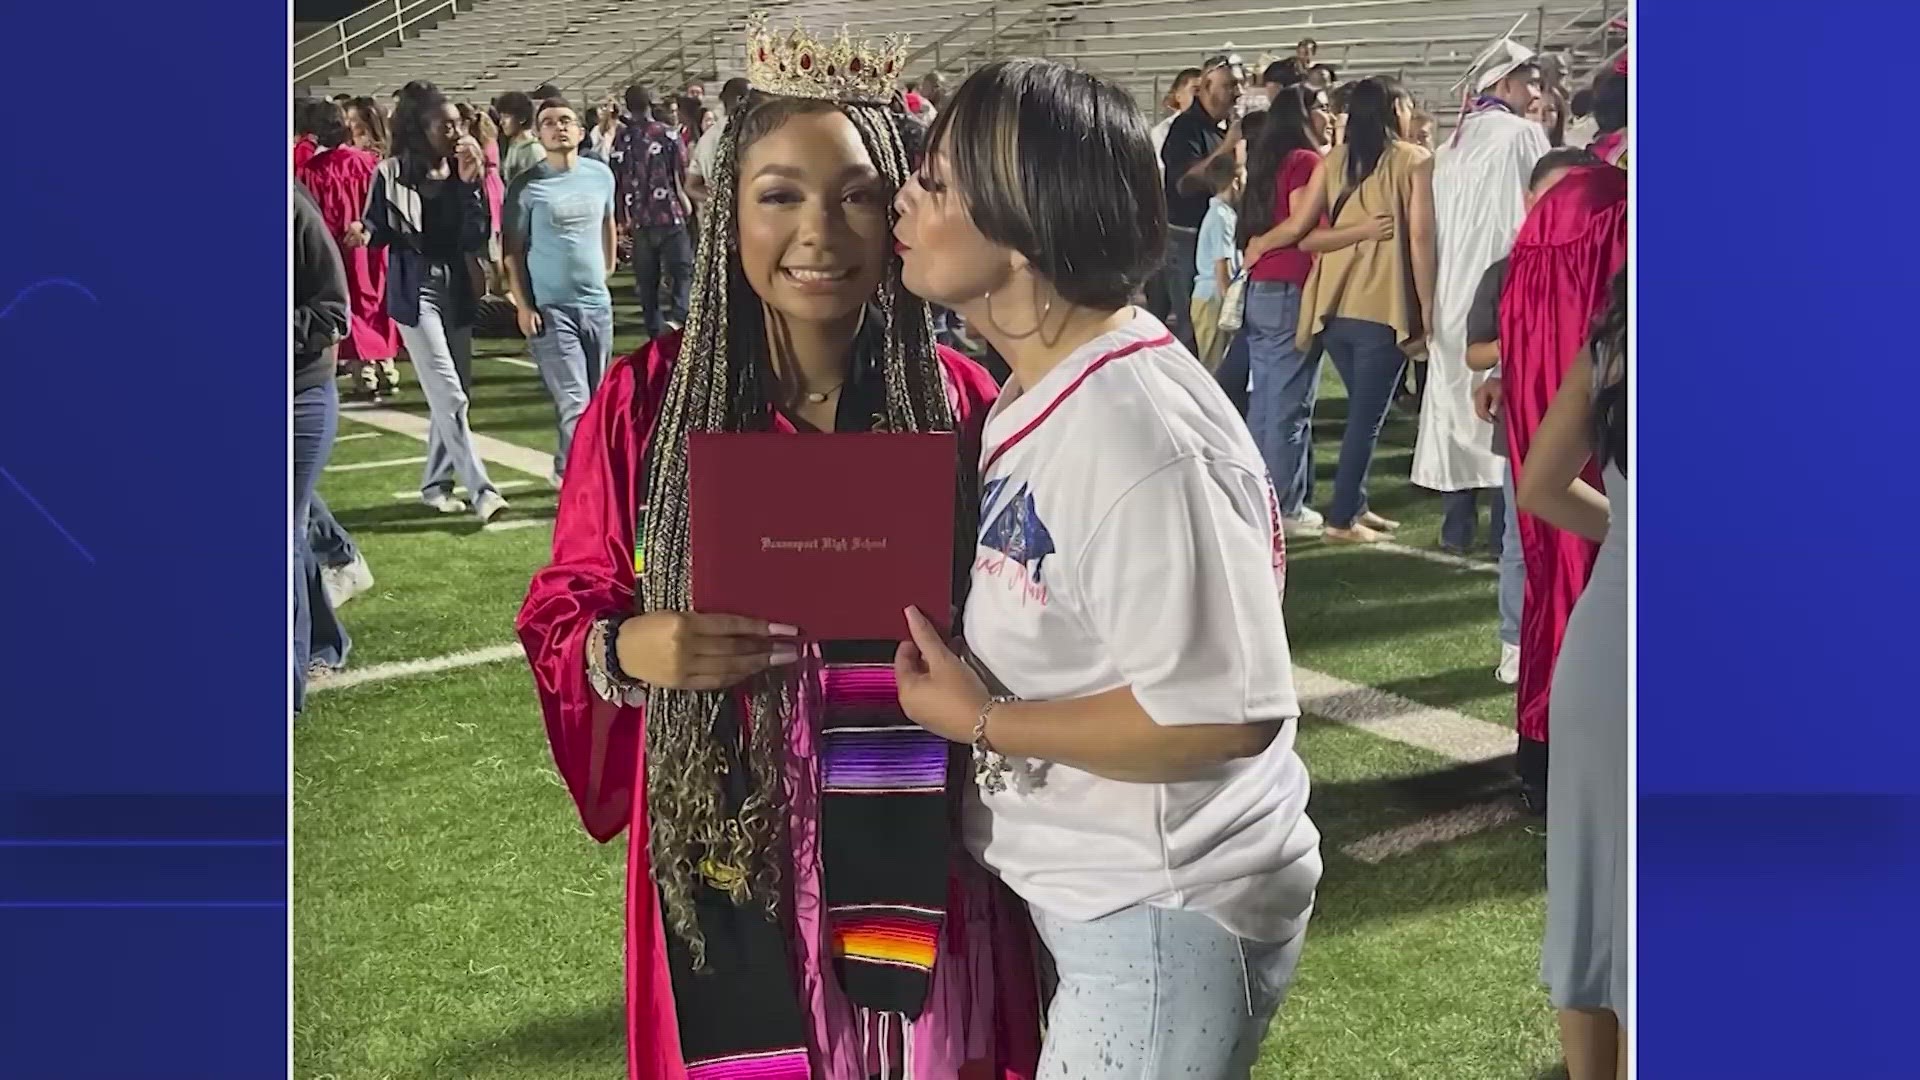 It's tradition for last year's queen to crown the next year's winner but Kayleigh Craddock said she won't be allowed to because of what she wore to graduation.